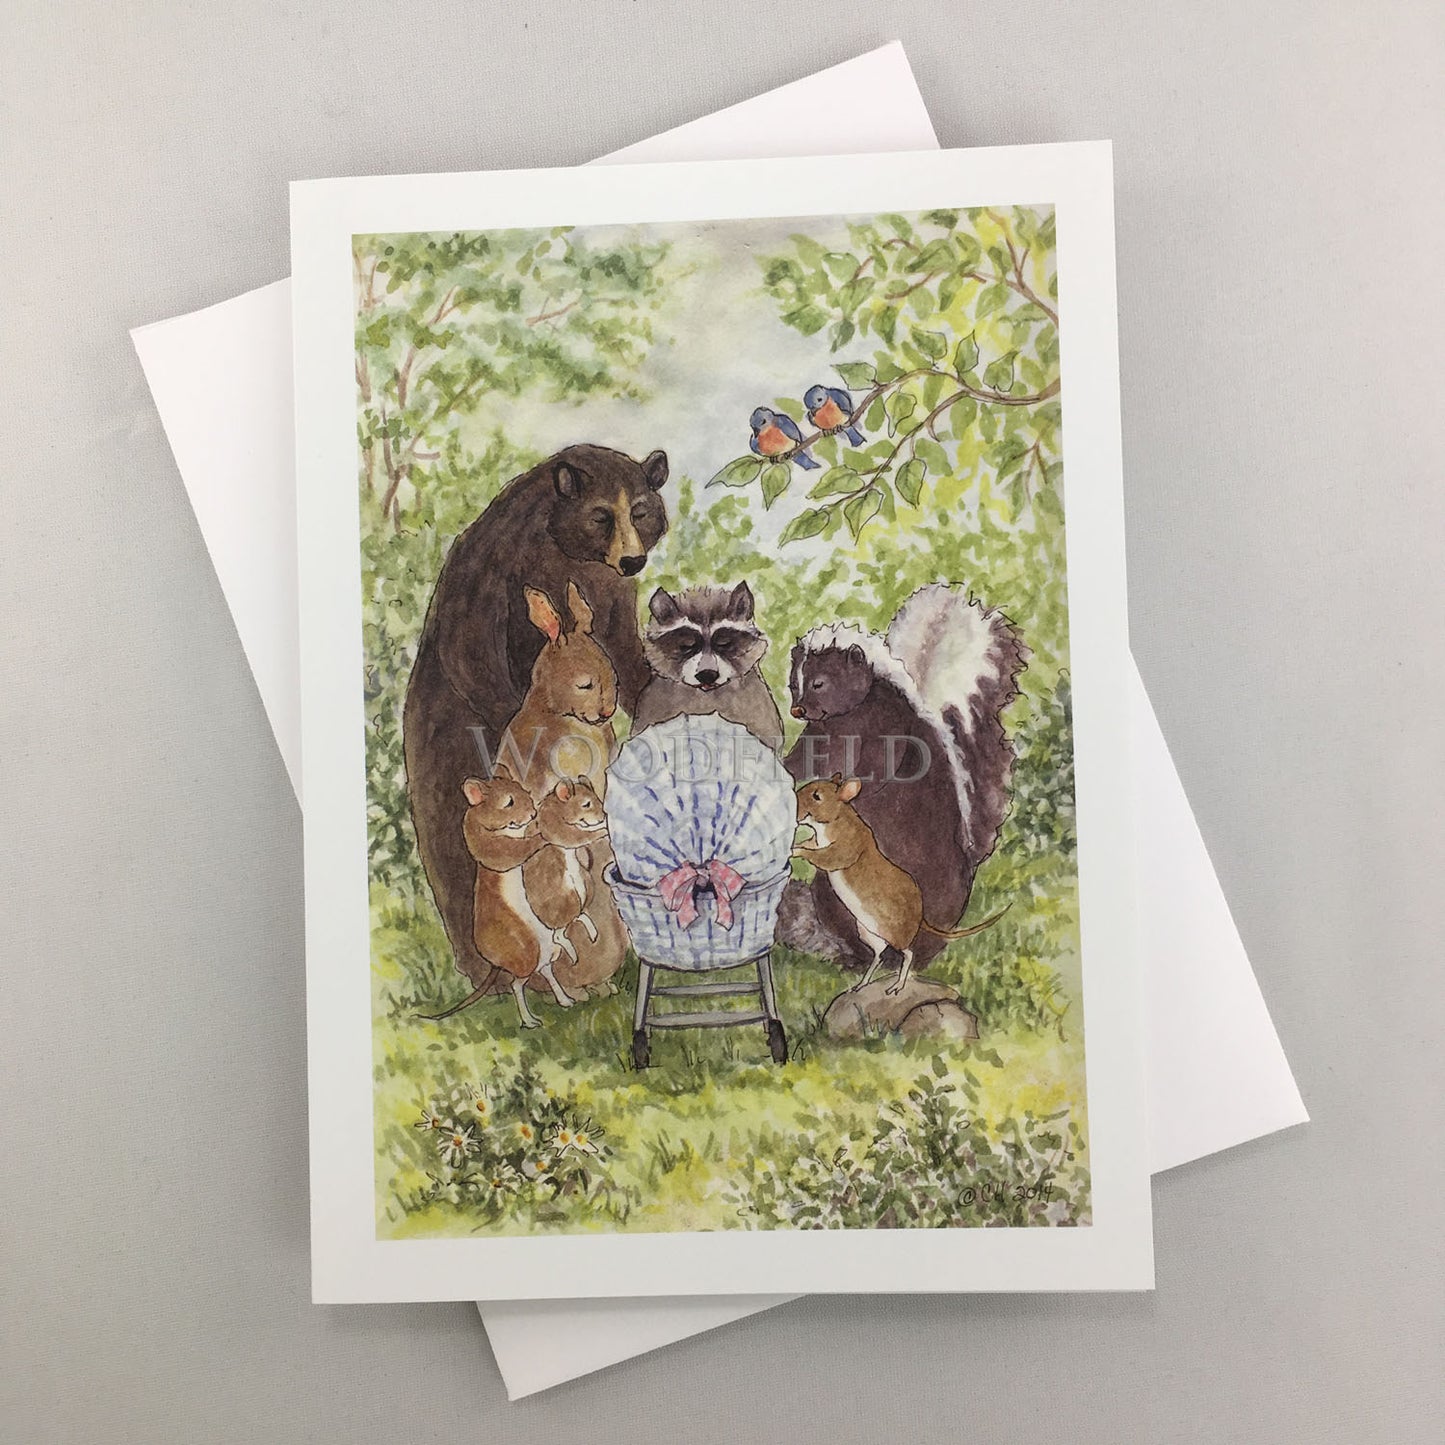 New Arrival - Greeting Card by Woodfield Press